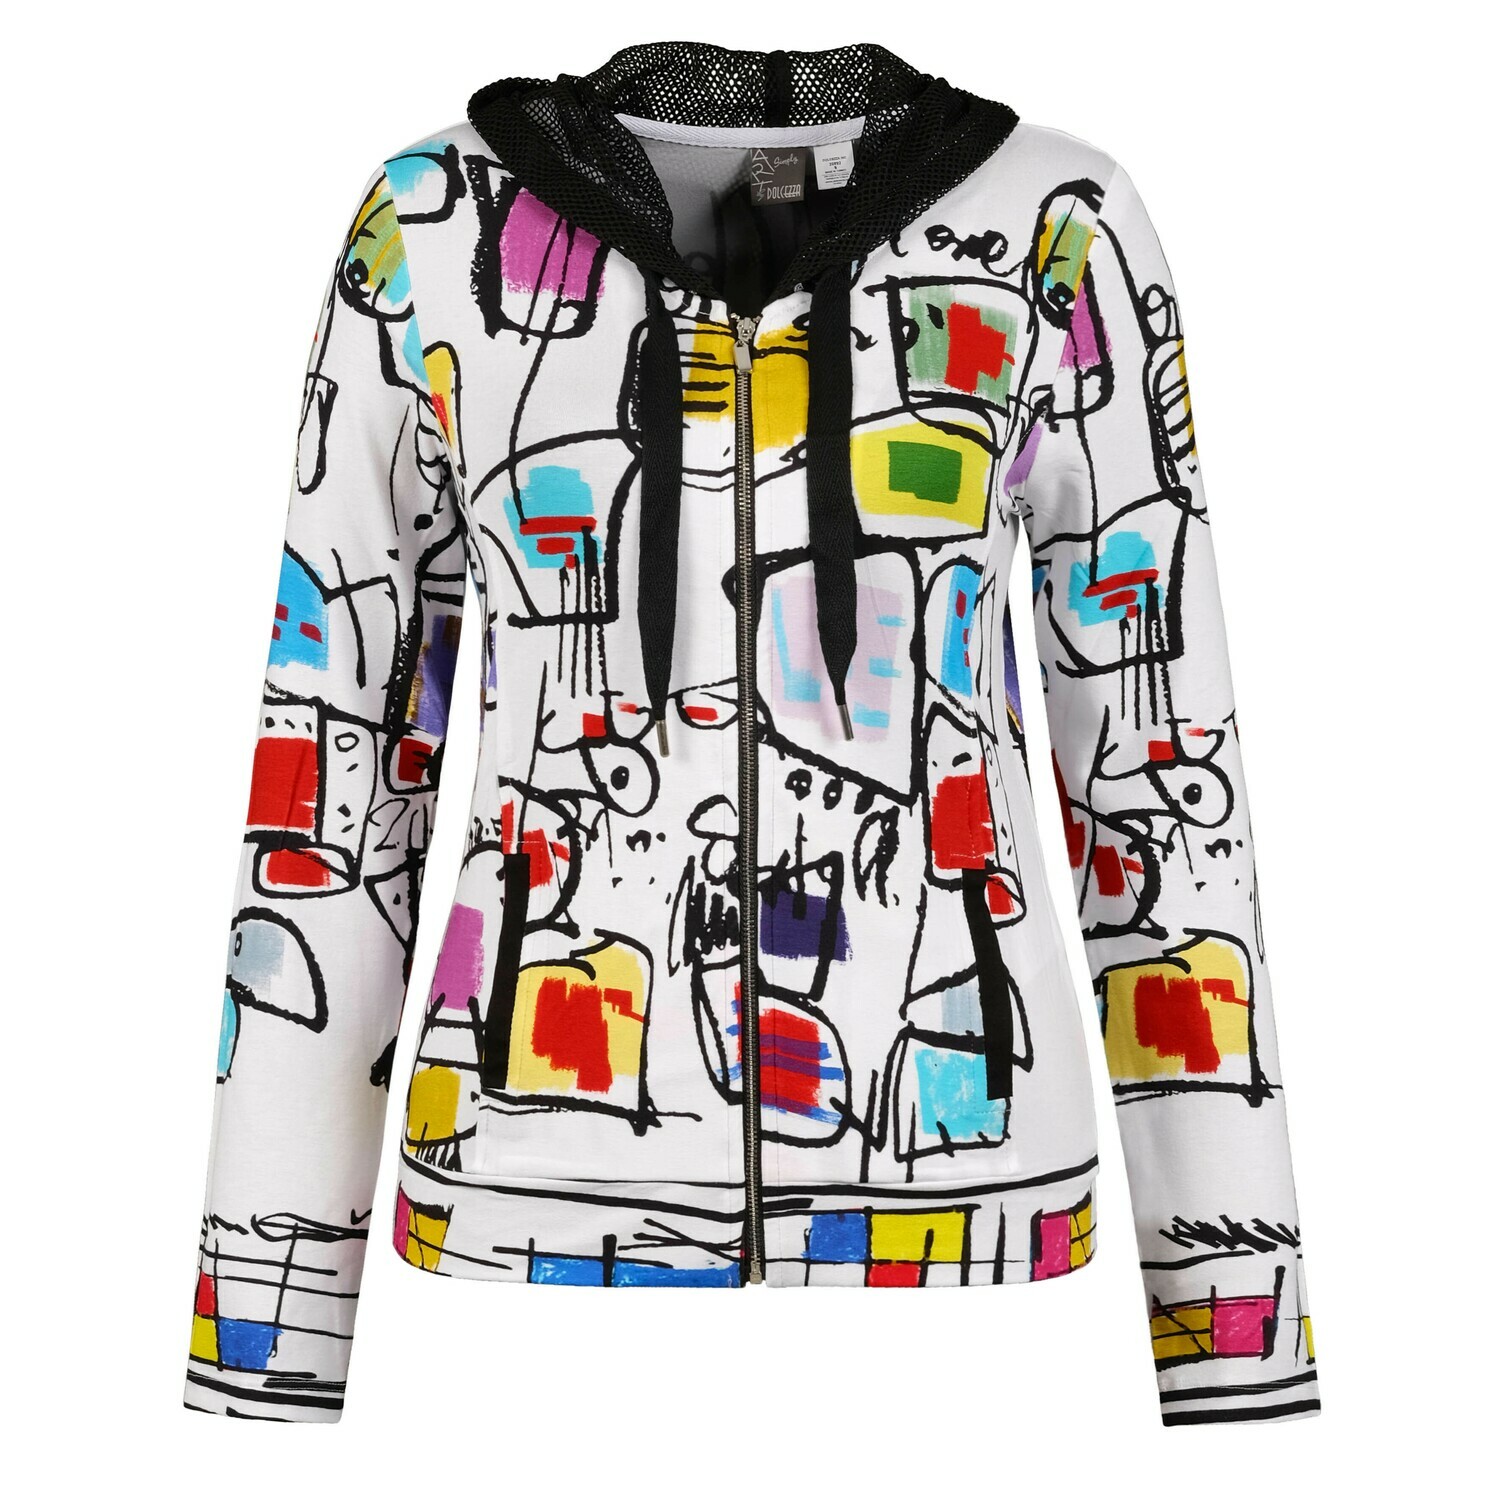 Simply Art Dolcezza: Etagere & Miss Eze Printed Hoodie Jacket SOLD OUT